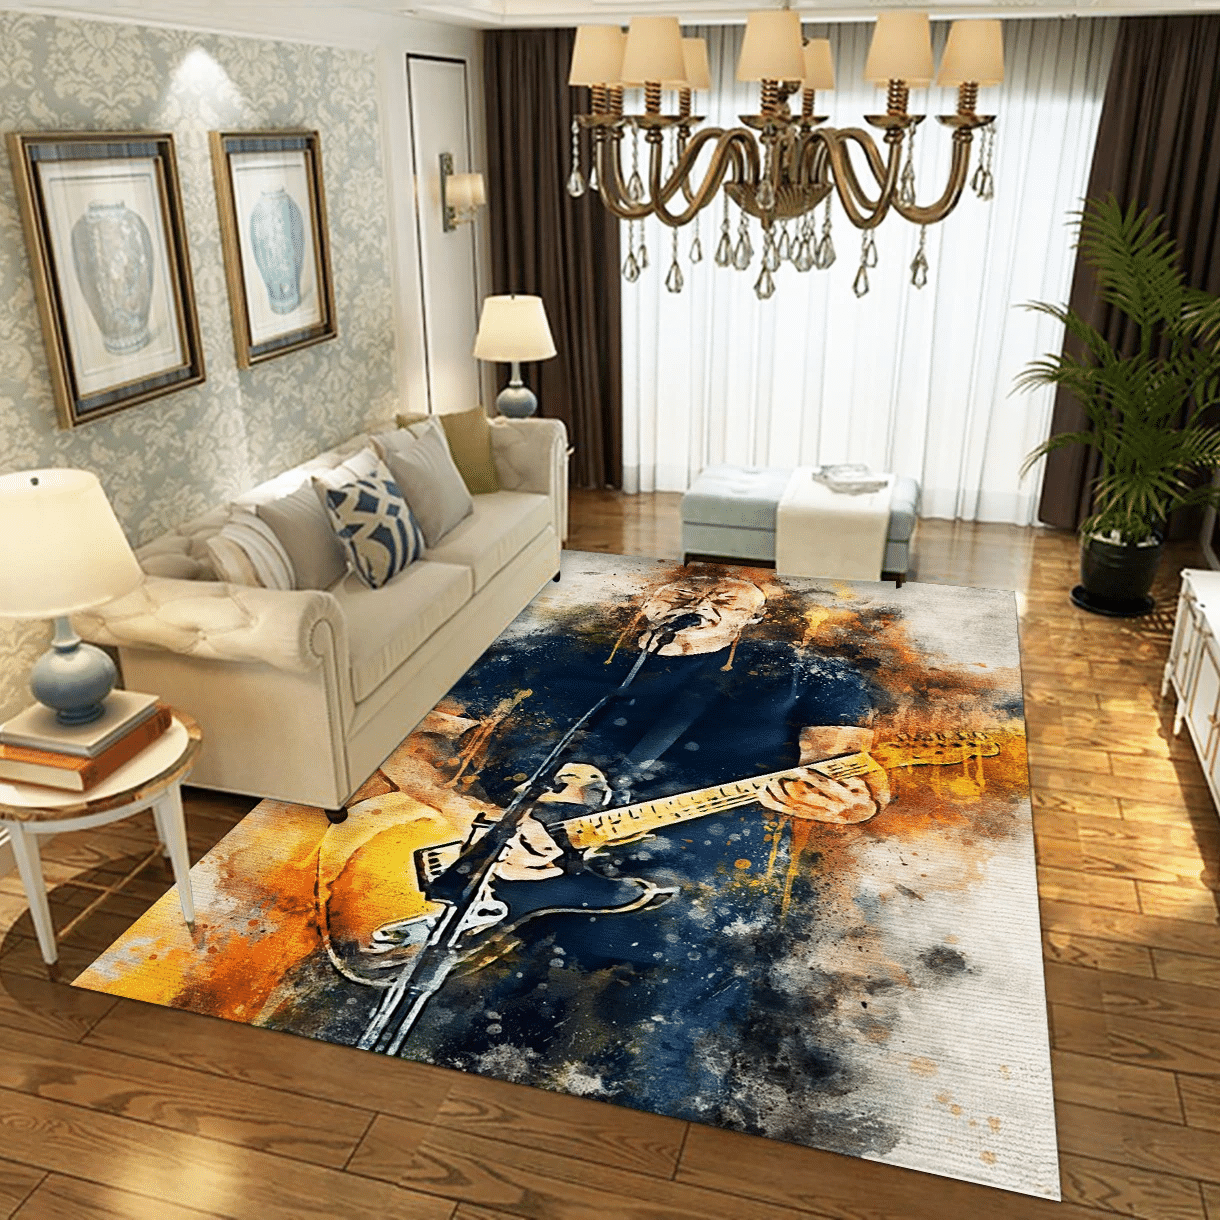 David Gilmour Pink Floyd Music Area Rug, Living Room Rug - Home Decor - Indoor Outdoor Rugs 3